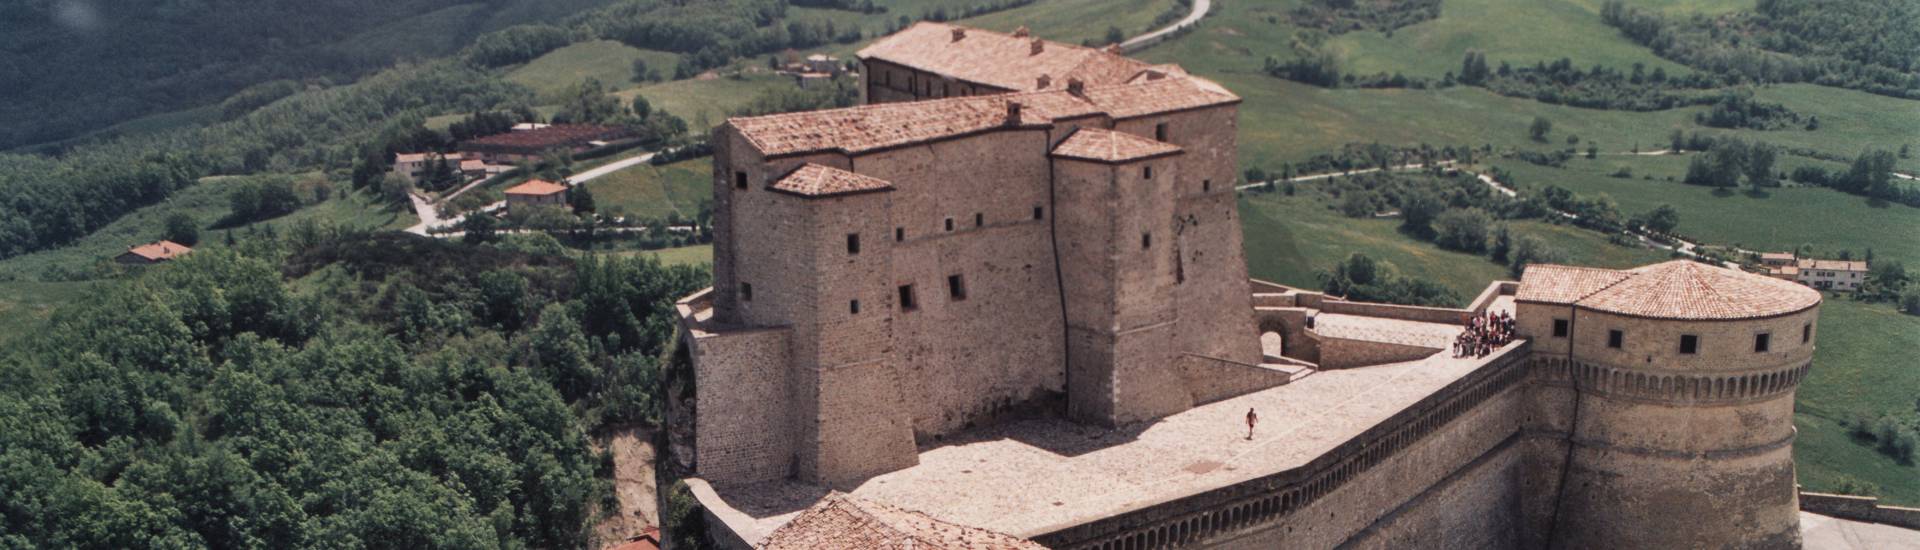 Fortress of San Leo - The Fortess of San Leo photo credits: |Comune di San Leo| - Comune di San Leo